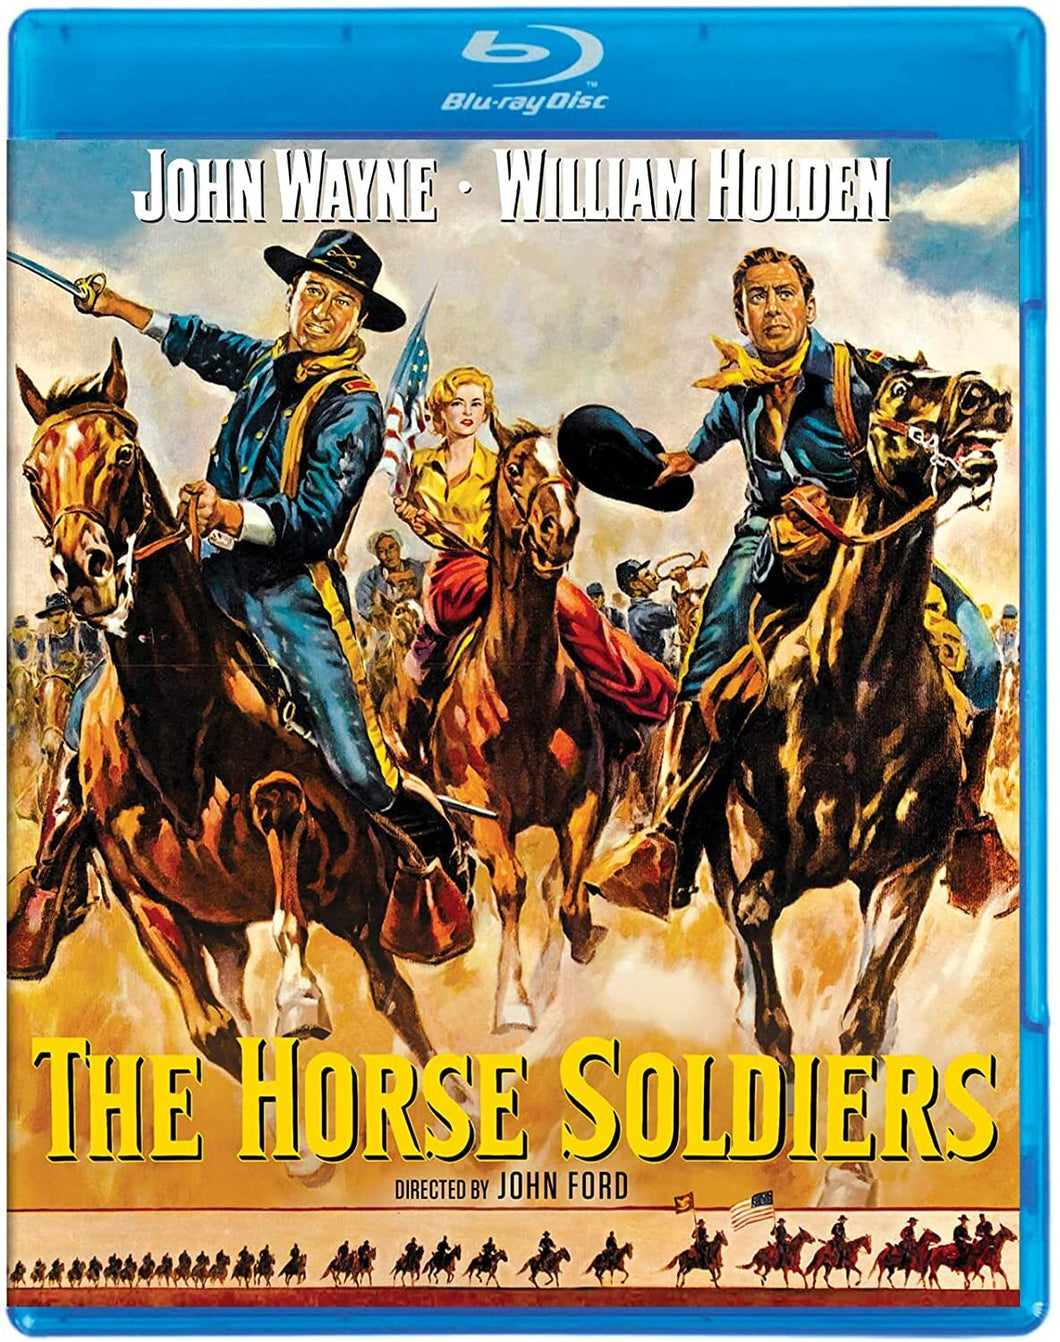 The Horse Soldiers (1959) de John Ford - front cover